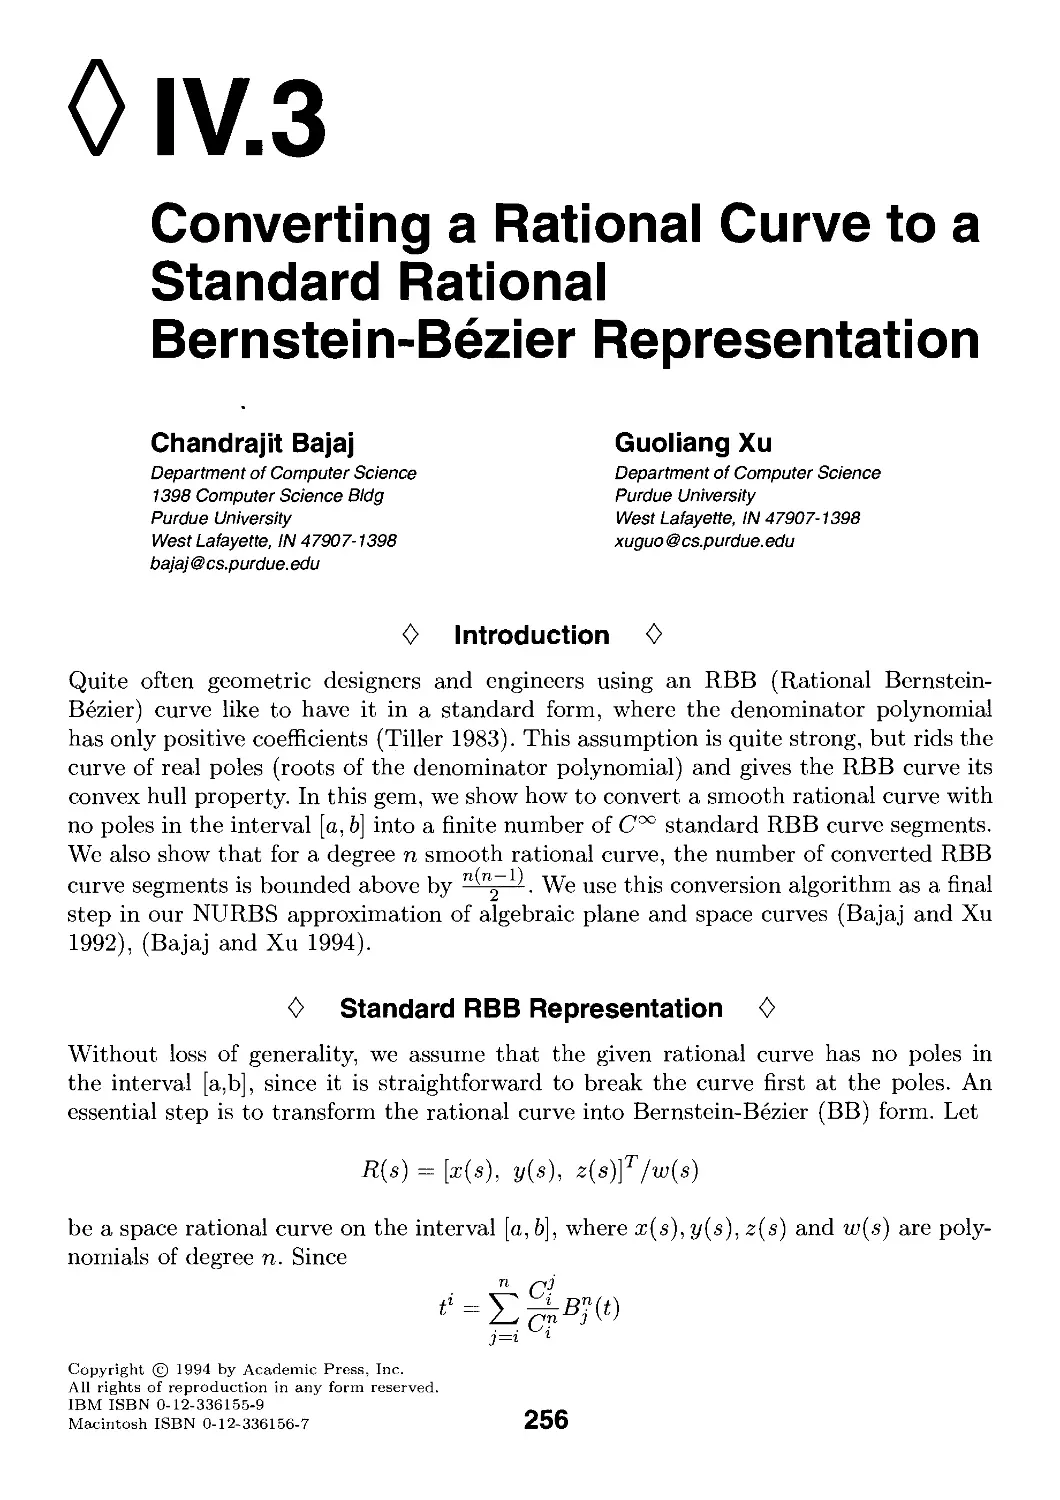 IV.3. Converting a Rational Curve to a Standard Rational Bernstein-Bezier Representation by  Bajaj and Xu